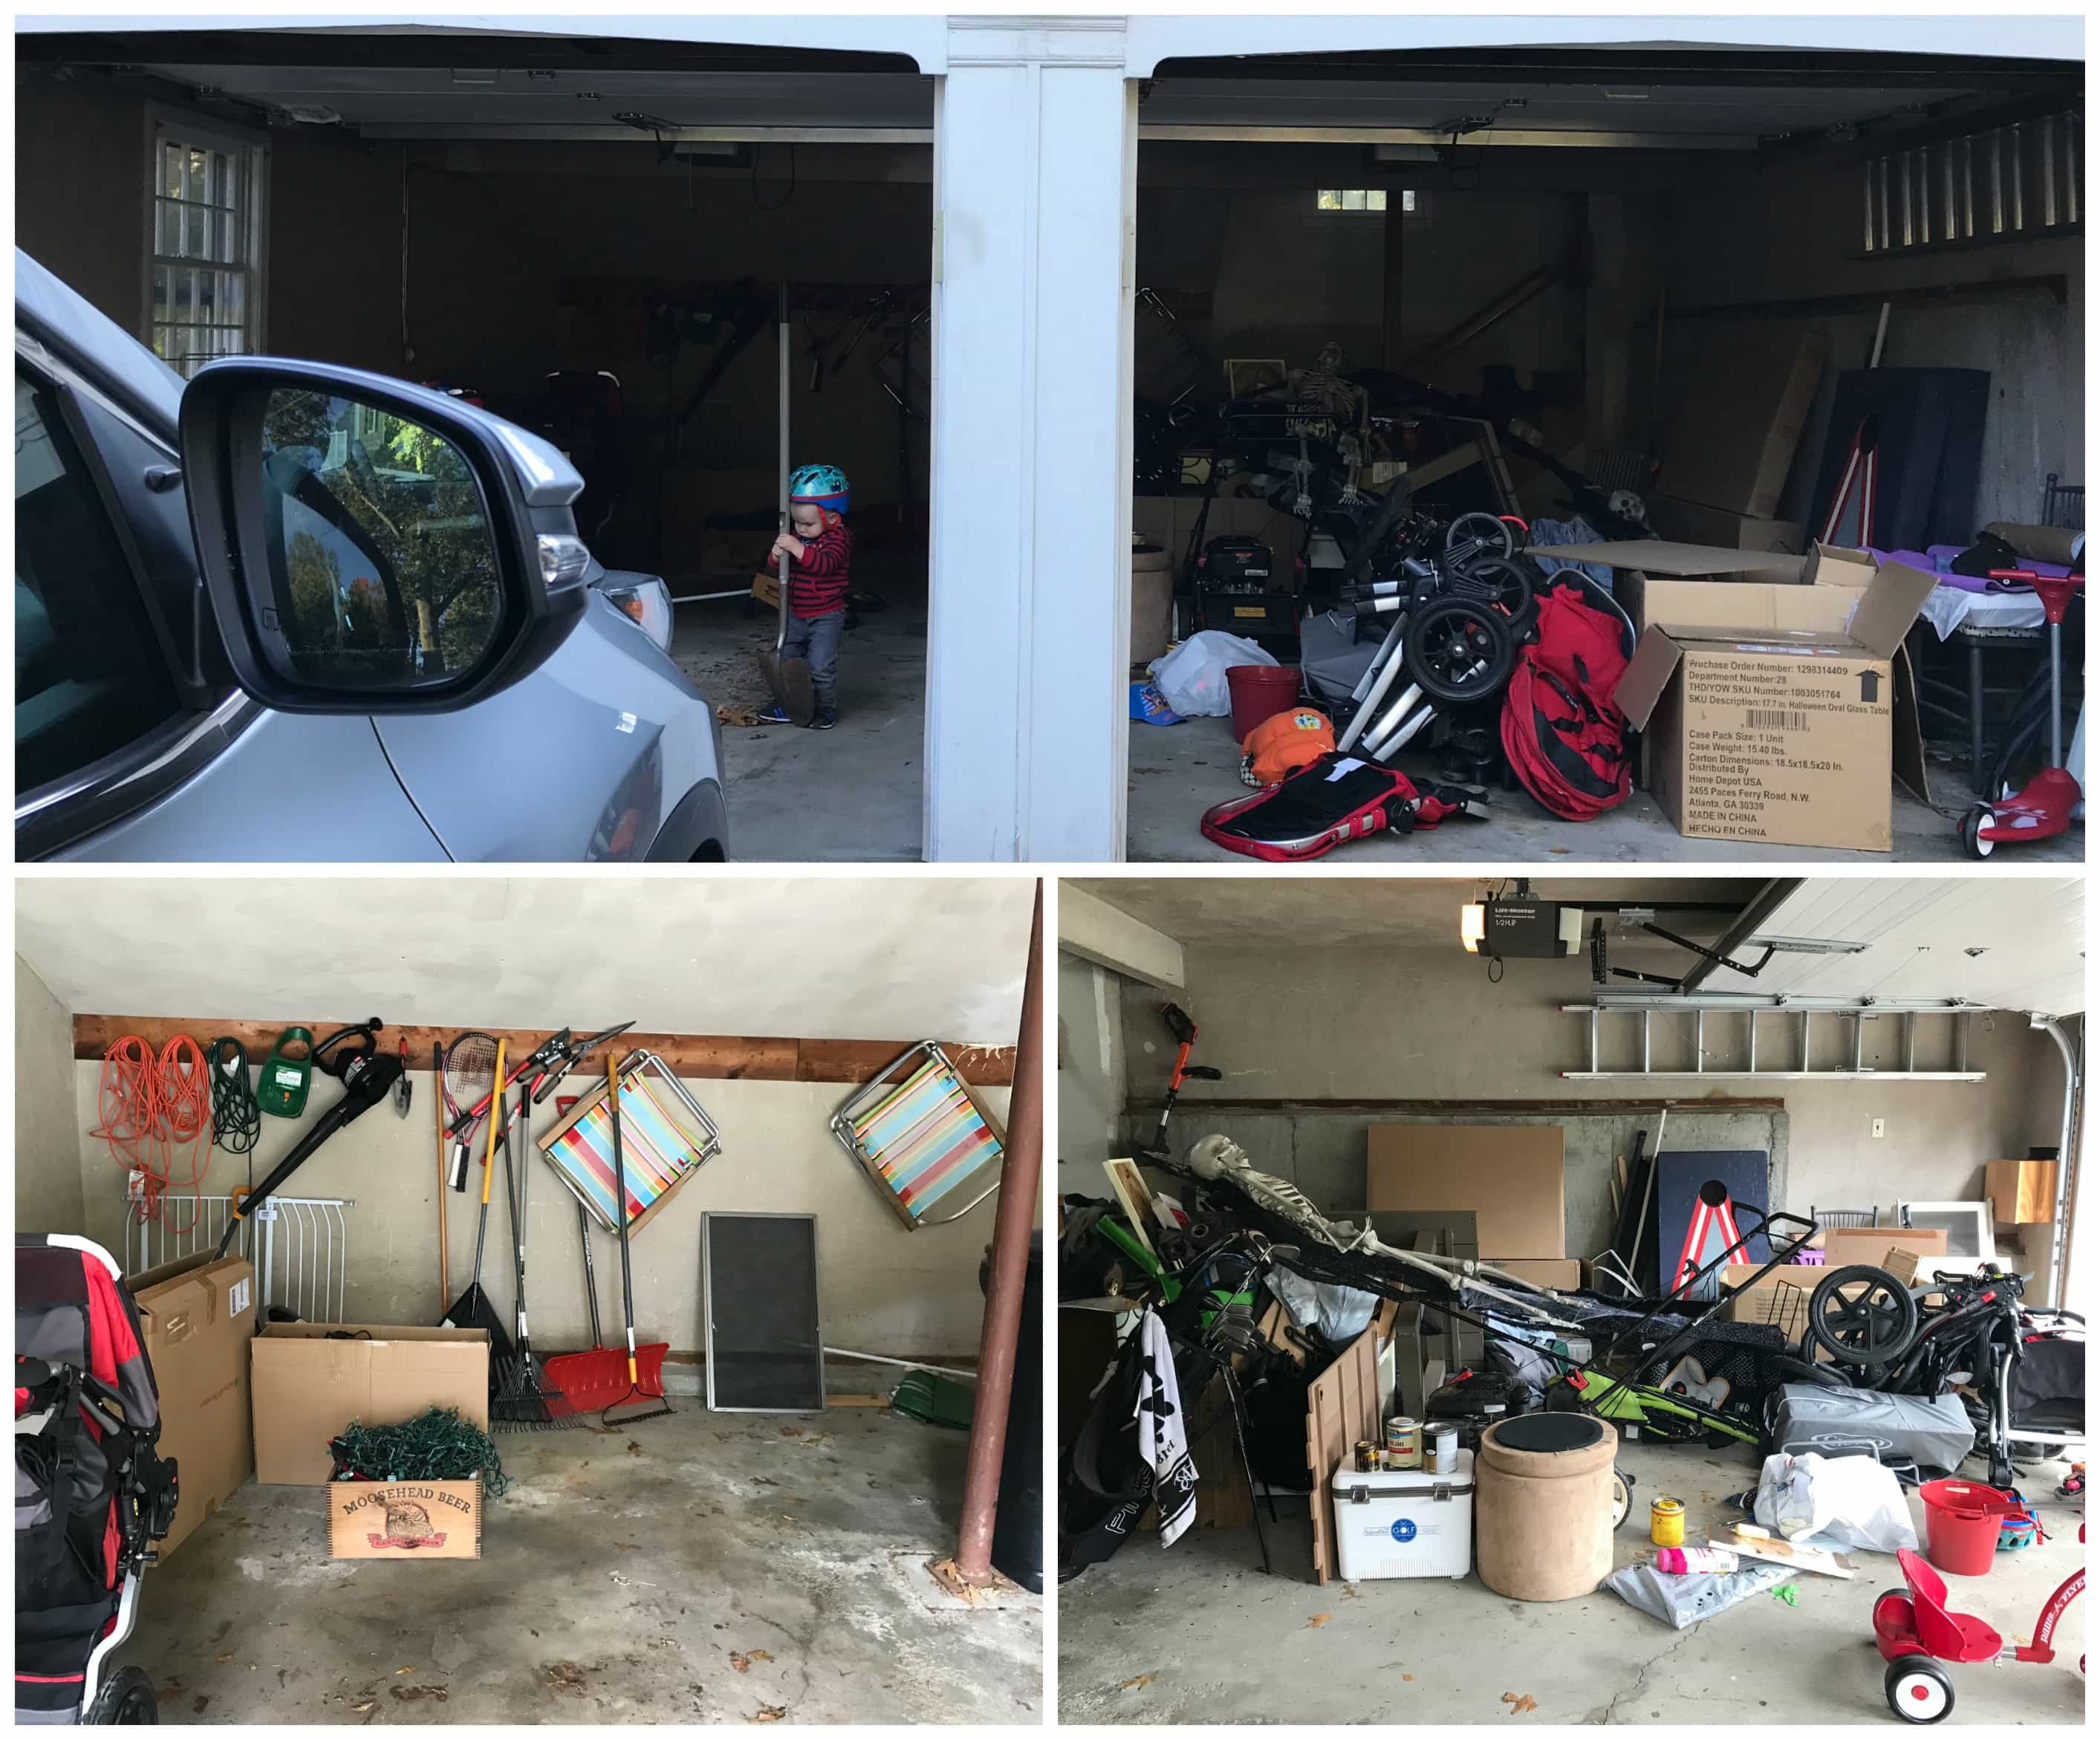 Garage makeover before and after